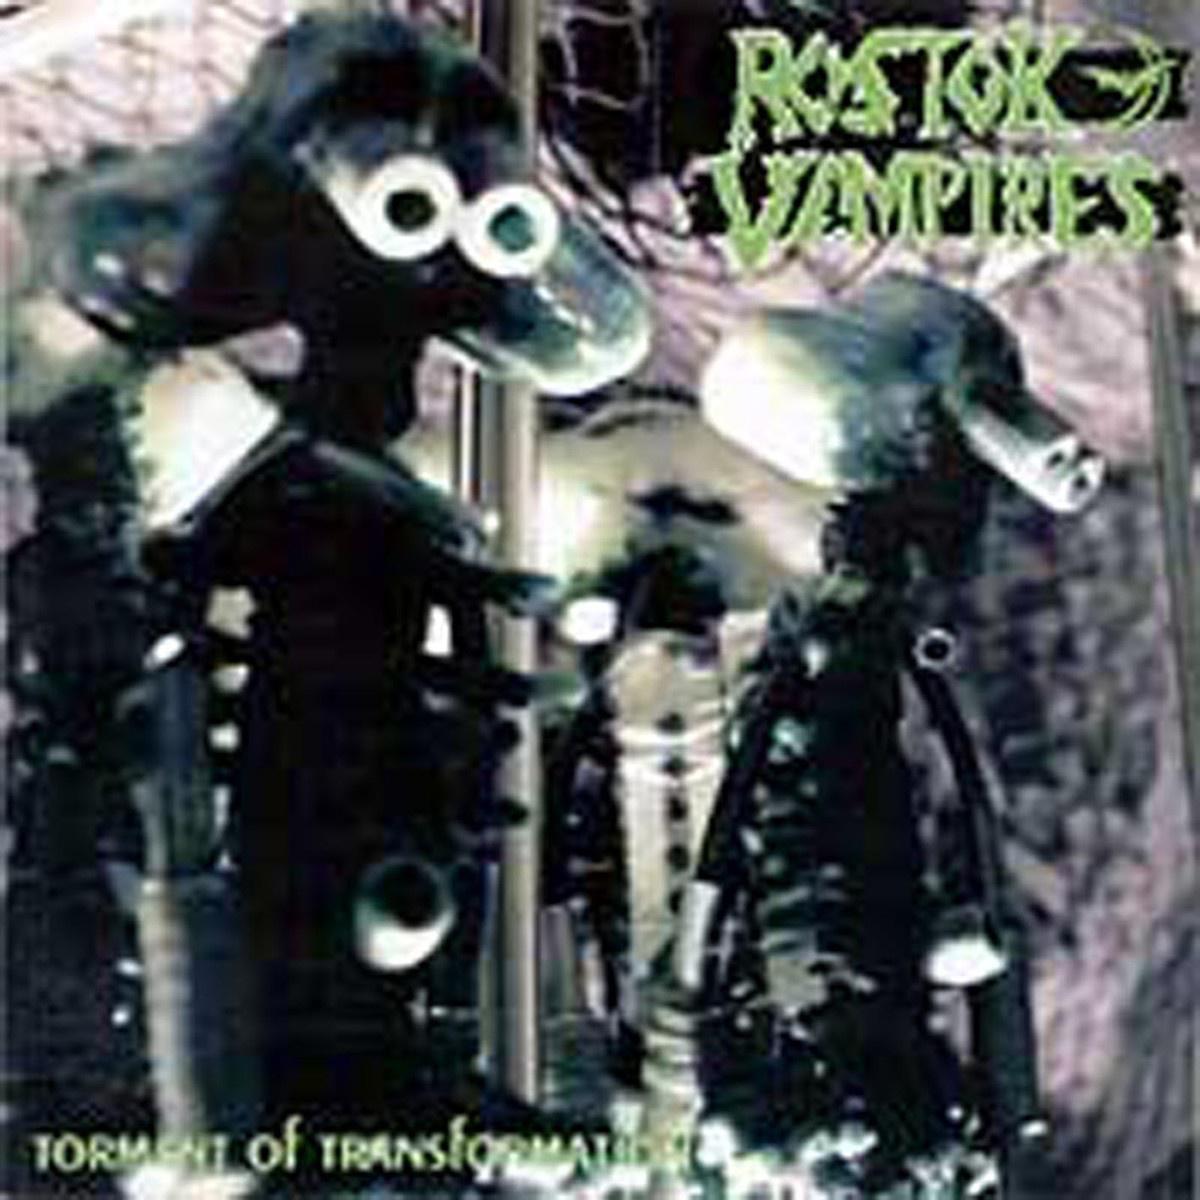 Rostok Vampires - In Between Boys And Toys